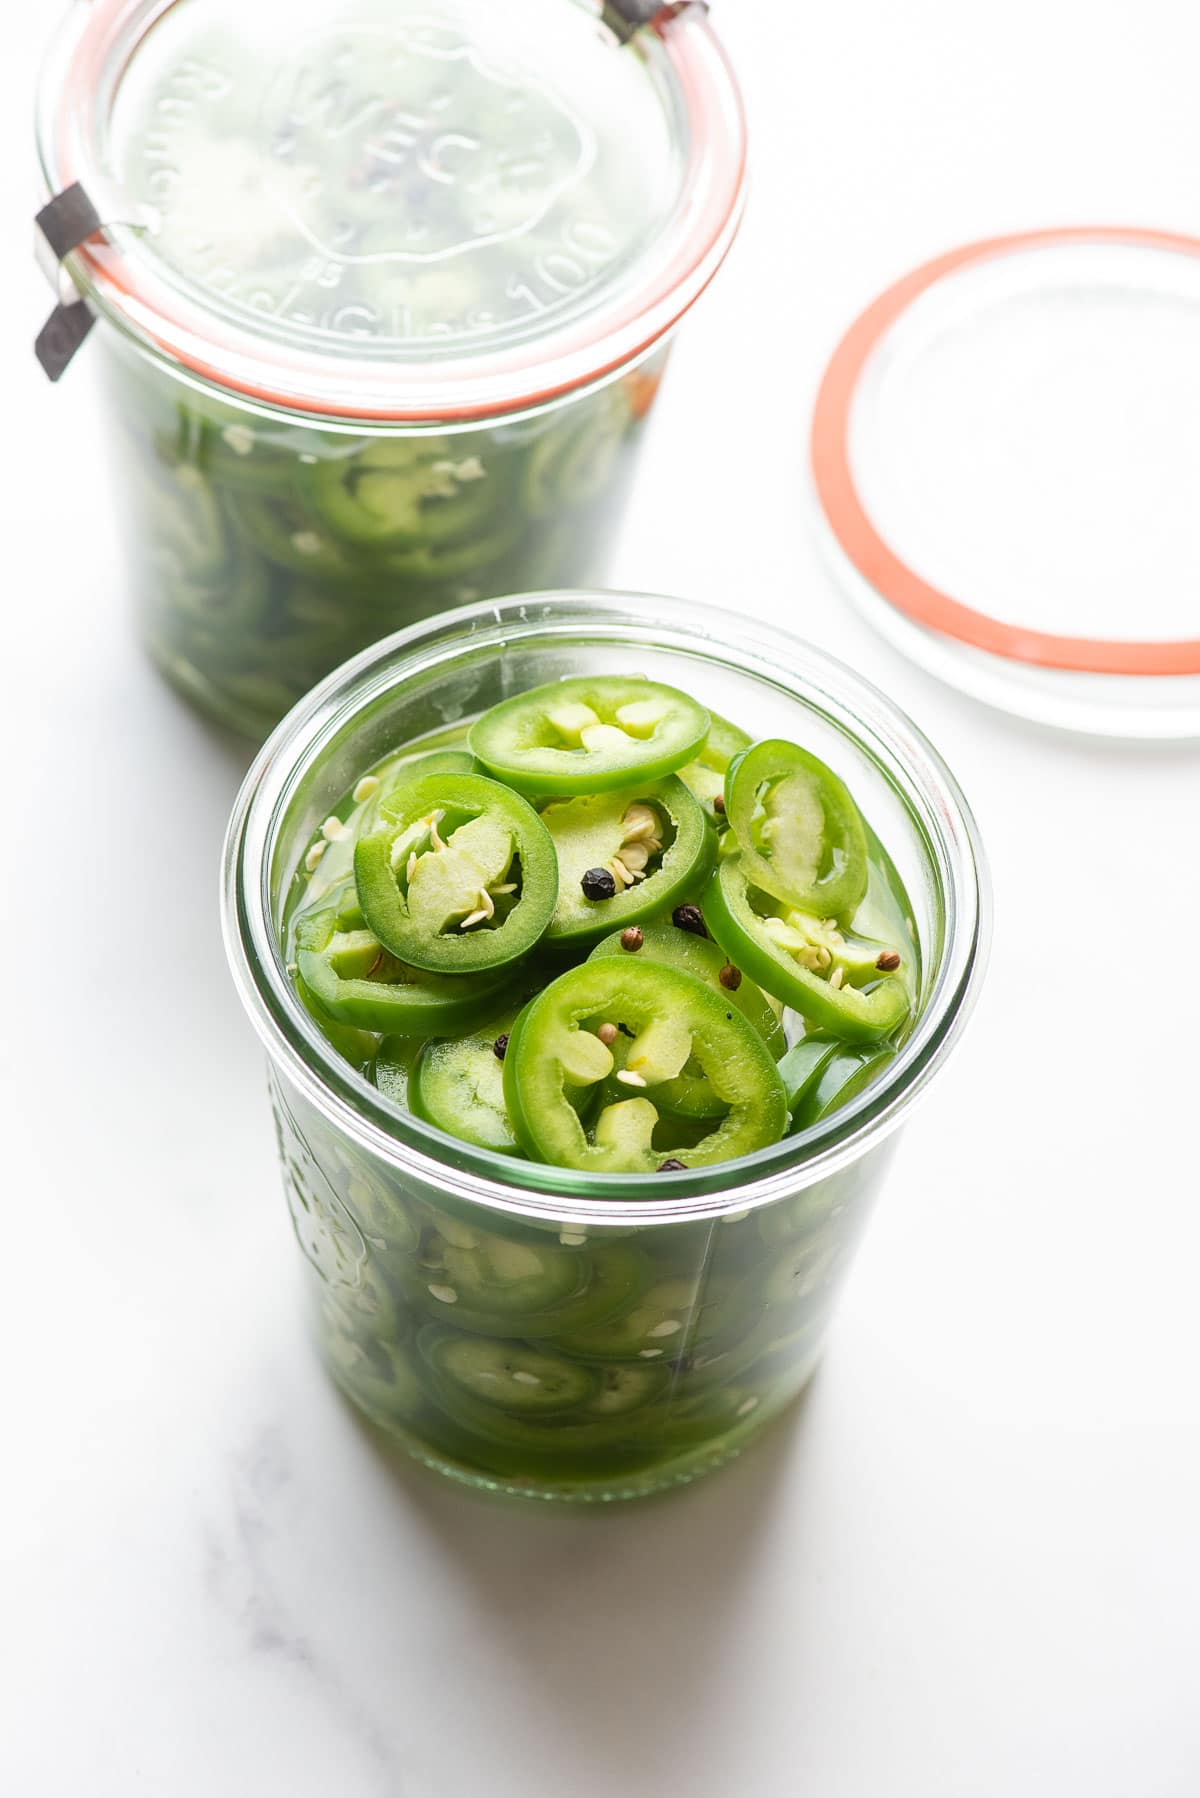 pickled jalapeno peppers in jars